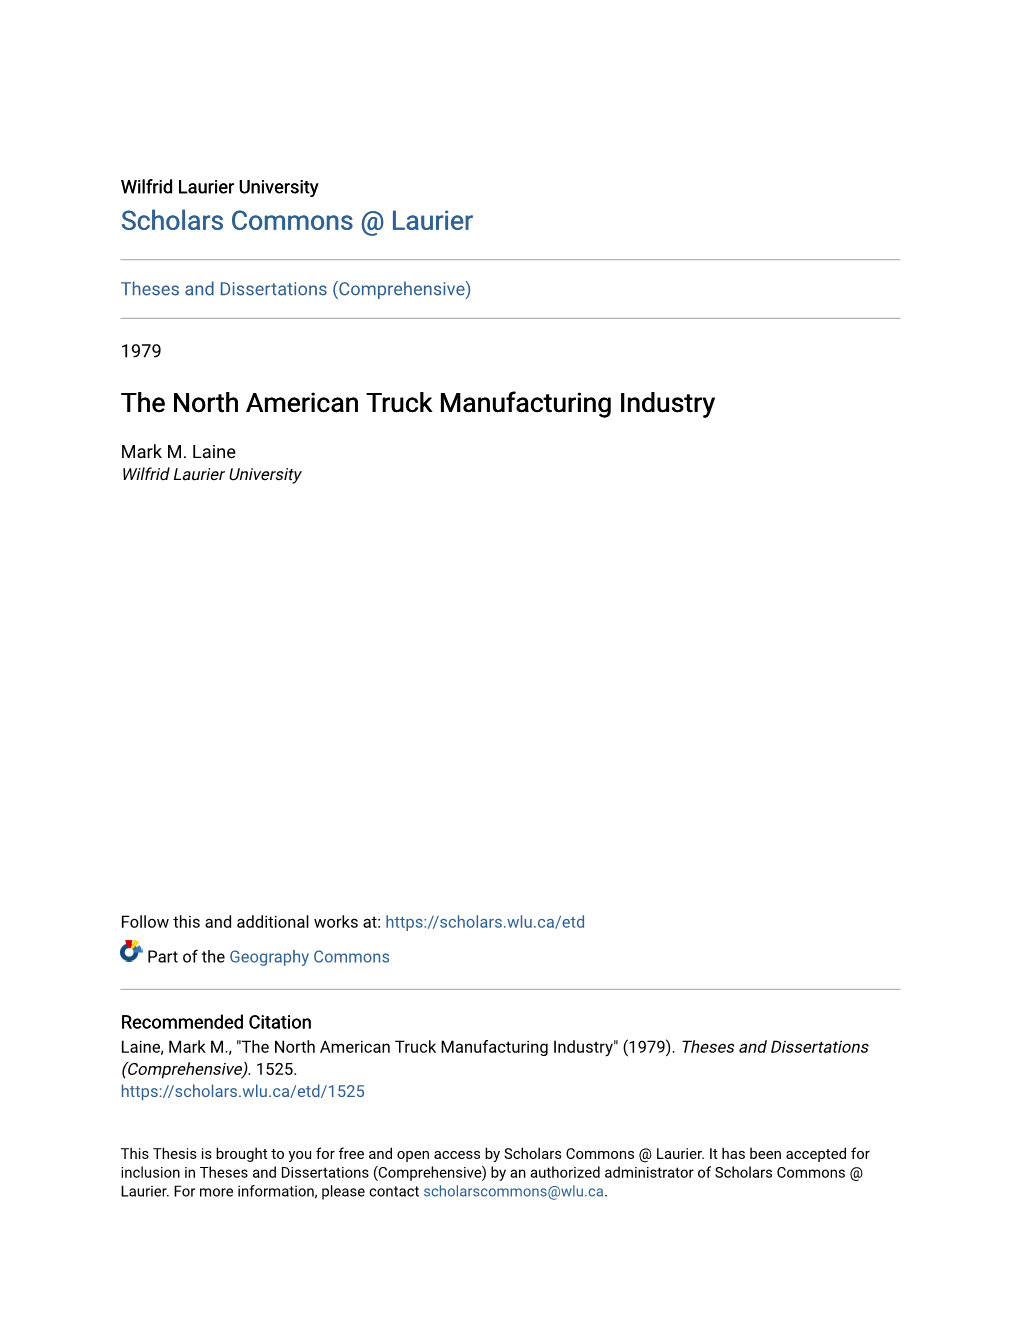 The North American Truck Manufacturing Industry